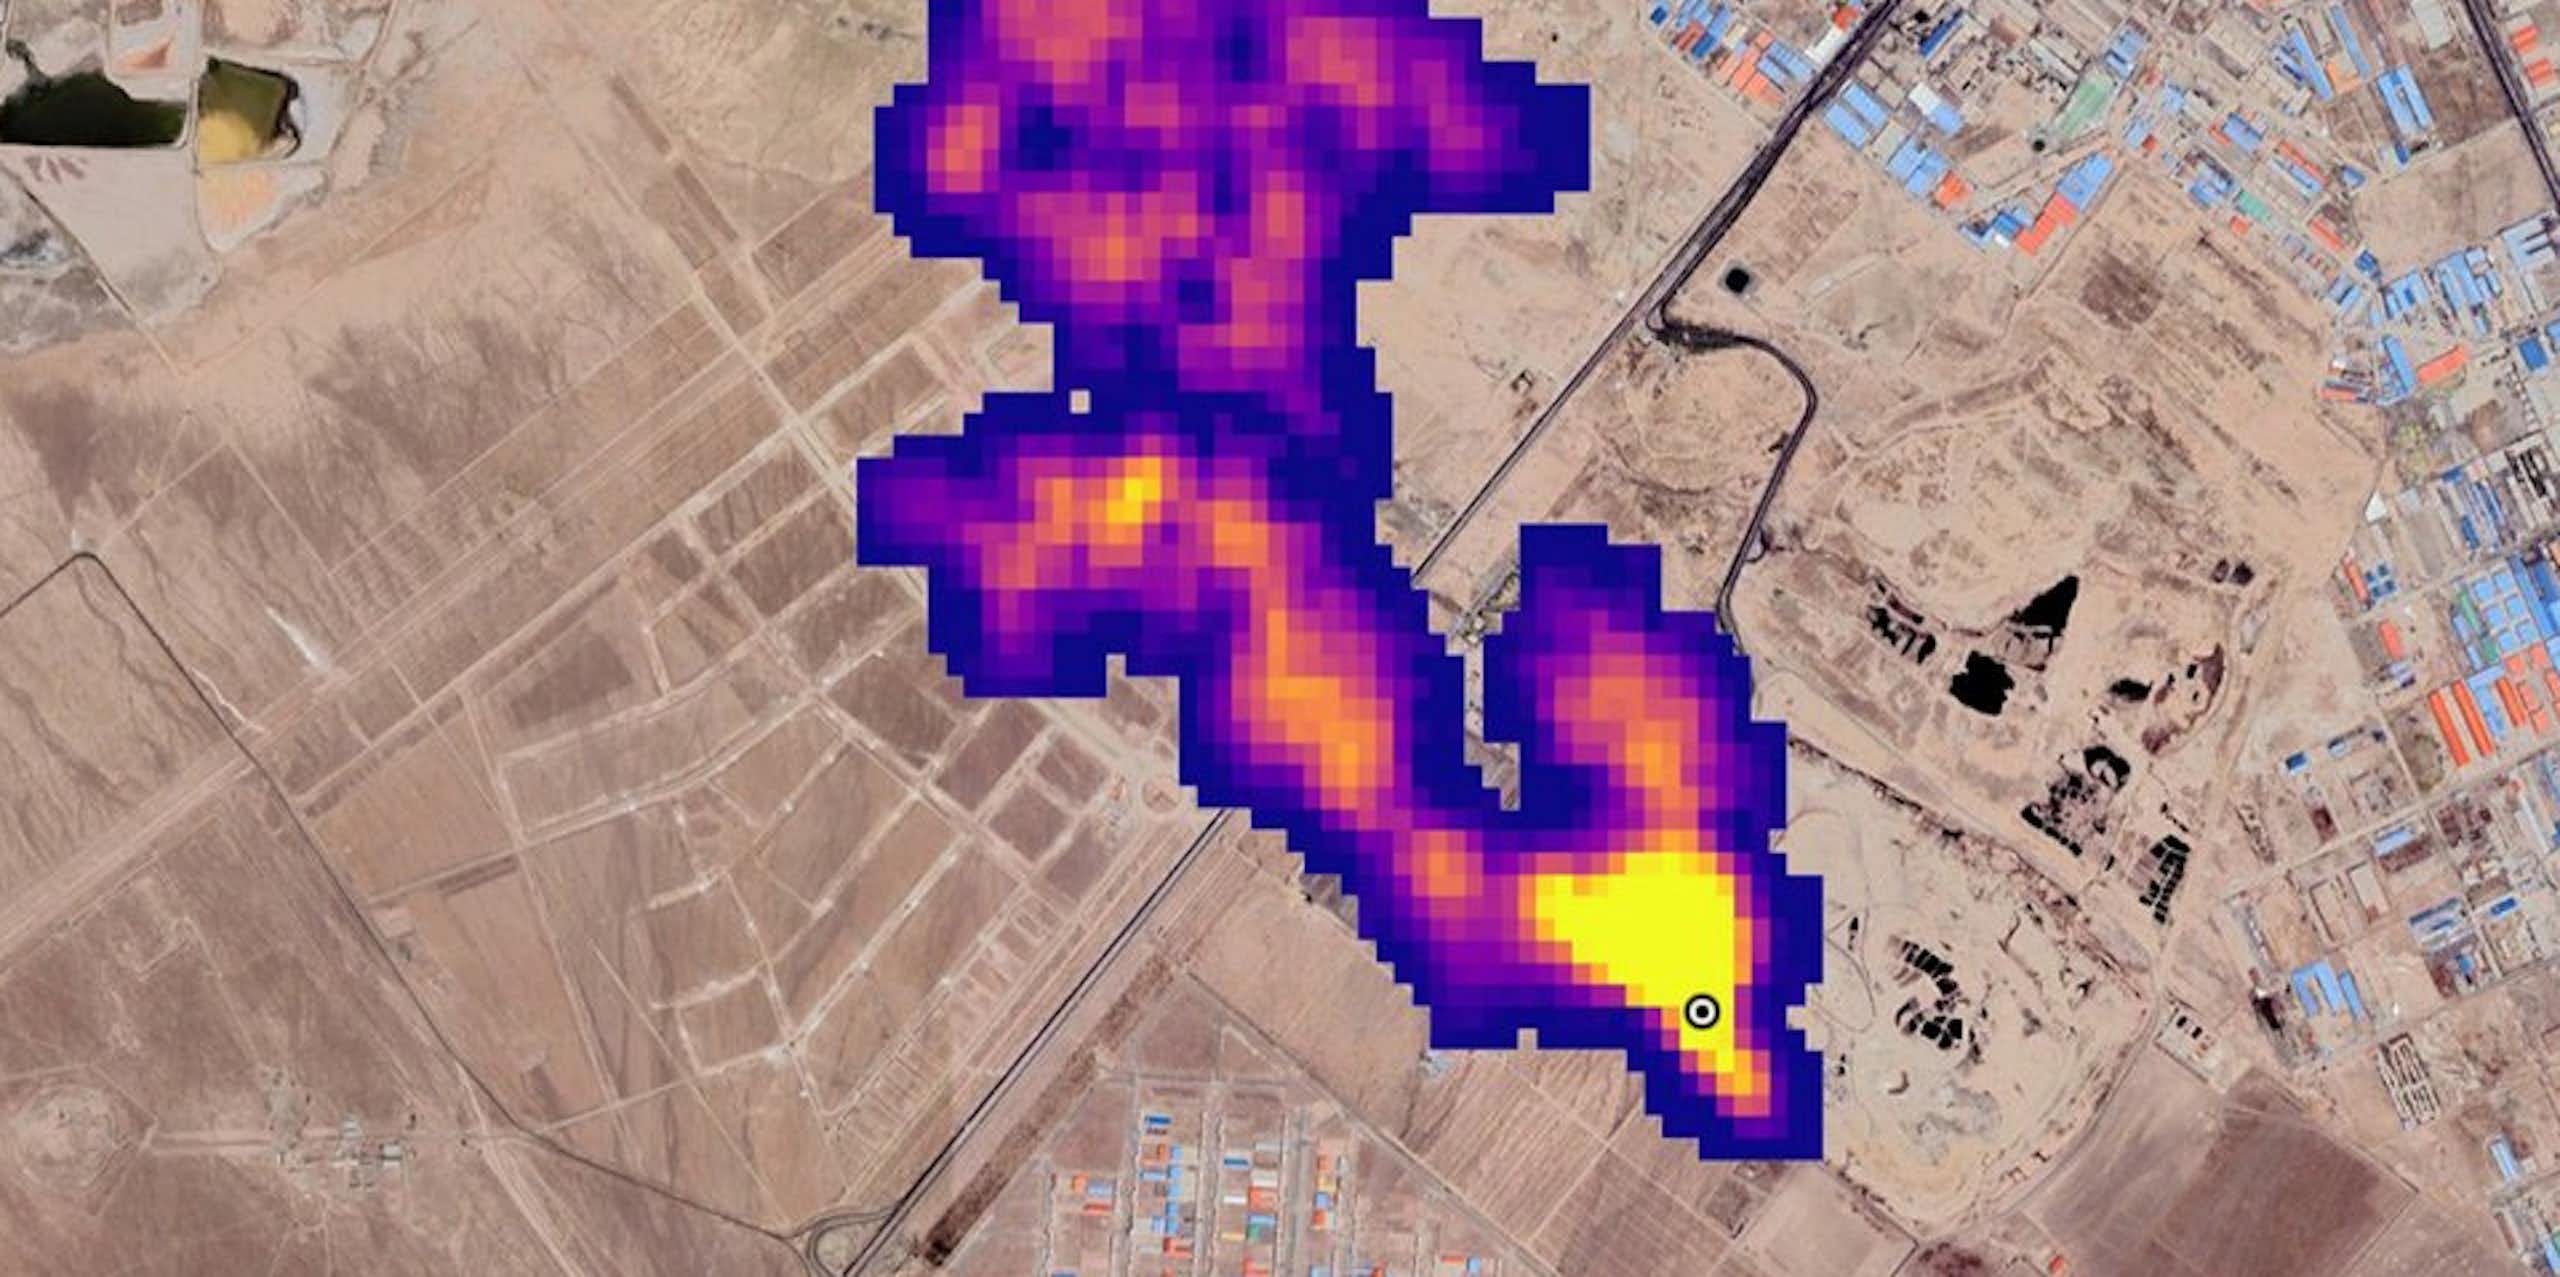 A colored image show methane leaking form a source with buildings nearby.